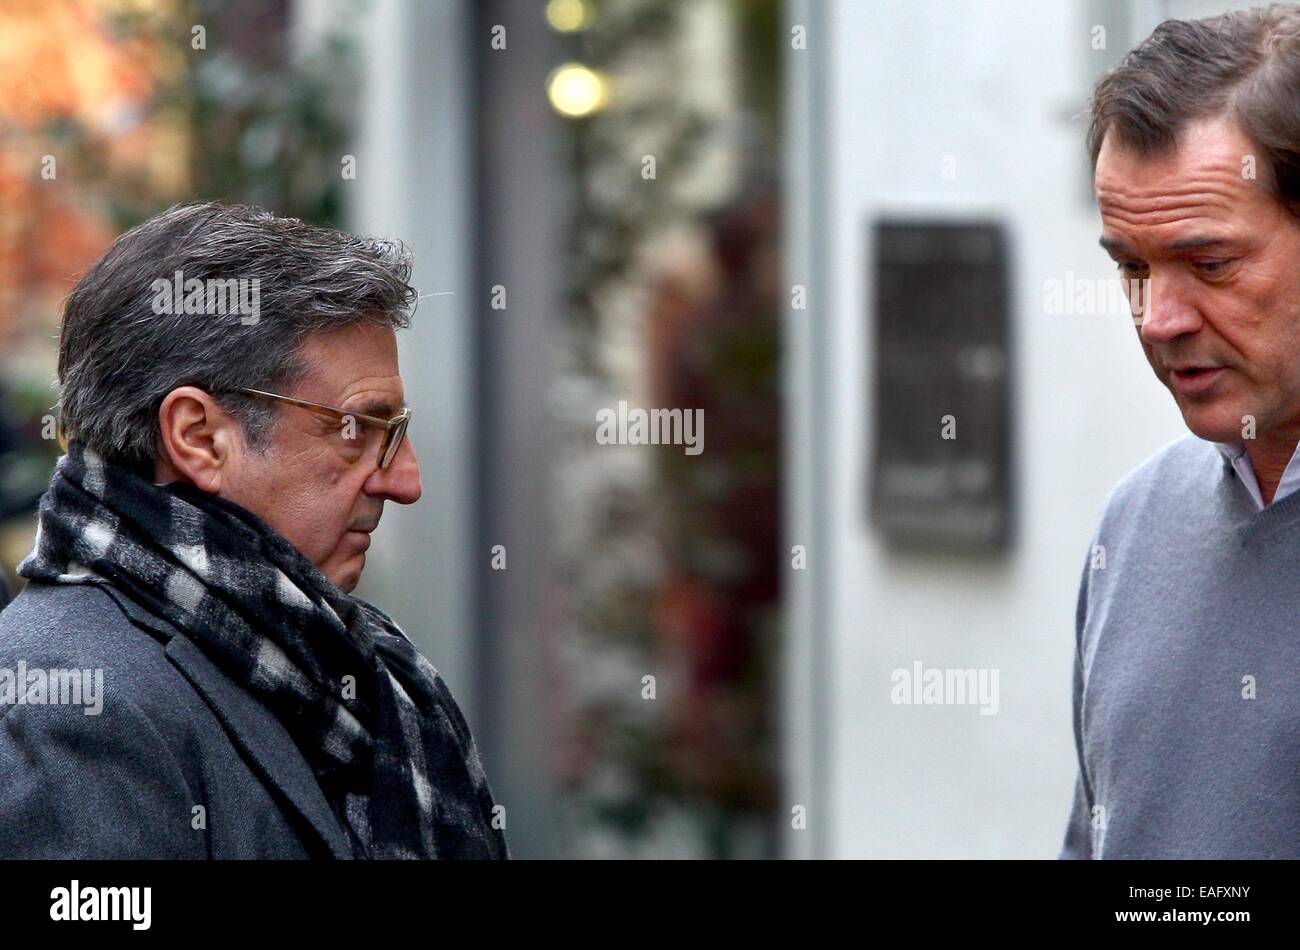 French actor Daniel Auteuil (L) and German actor Sebastian Koch pose on the set of the film 'Bamberski-Der Fall Kalinka' (lit. the Kalinka case) in Lindau, Germany, 14 November 2014. The French and German justice system have been dealing with the Kalinka case since three decades. The film focusses on the death of the 14-year old girl and her father's actions of vigilantism. Photo: Karl-Josef Hildenbrand/dpa Stock Photo